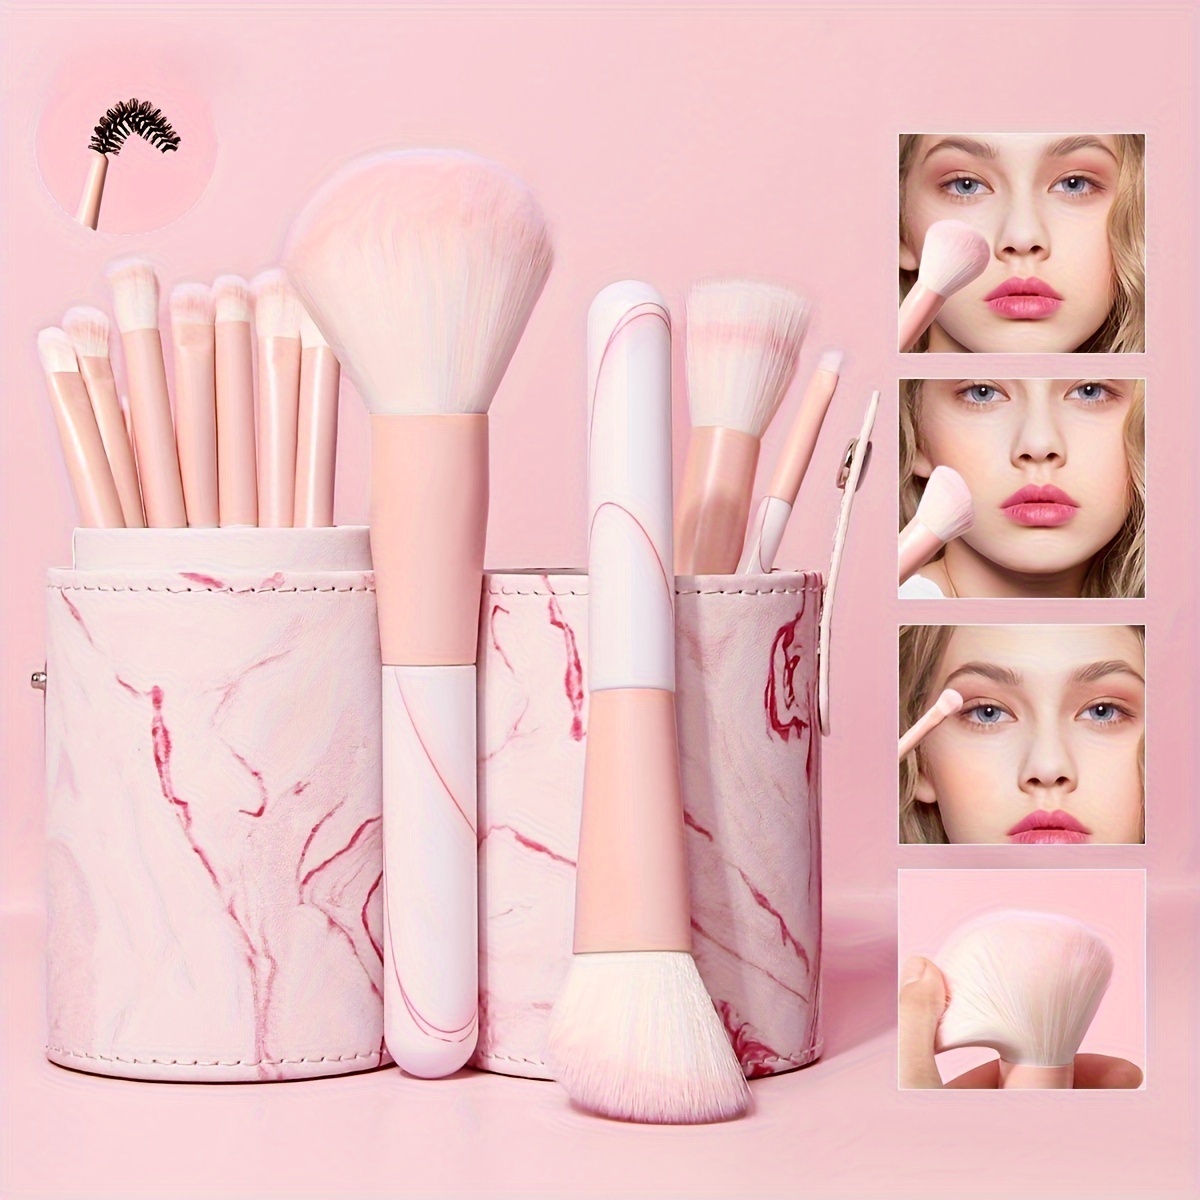 

12pcs Professional Makeup Brush Set With 1pc Storage Bucket- Soft And Fluffy For Perfect Application Of Foundation, Powder, And Eyeshadow - Perfect For Christmas Gift - Gift Set Mother's Day Gift